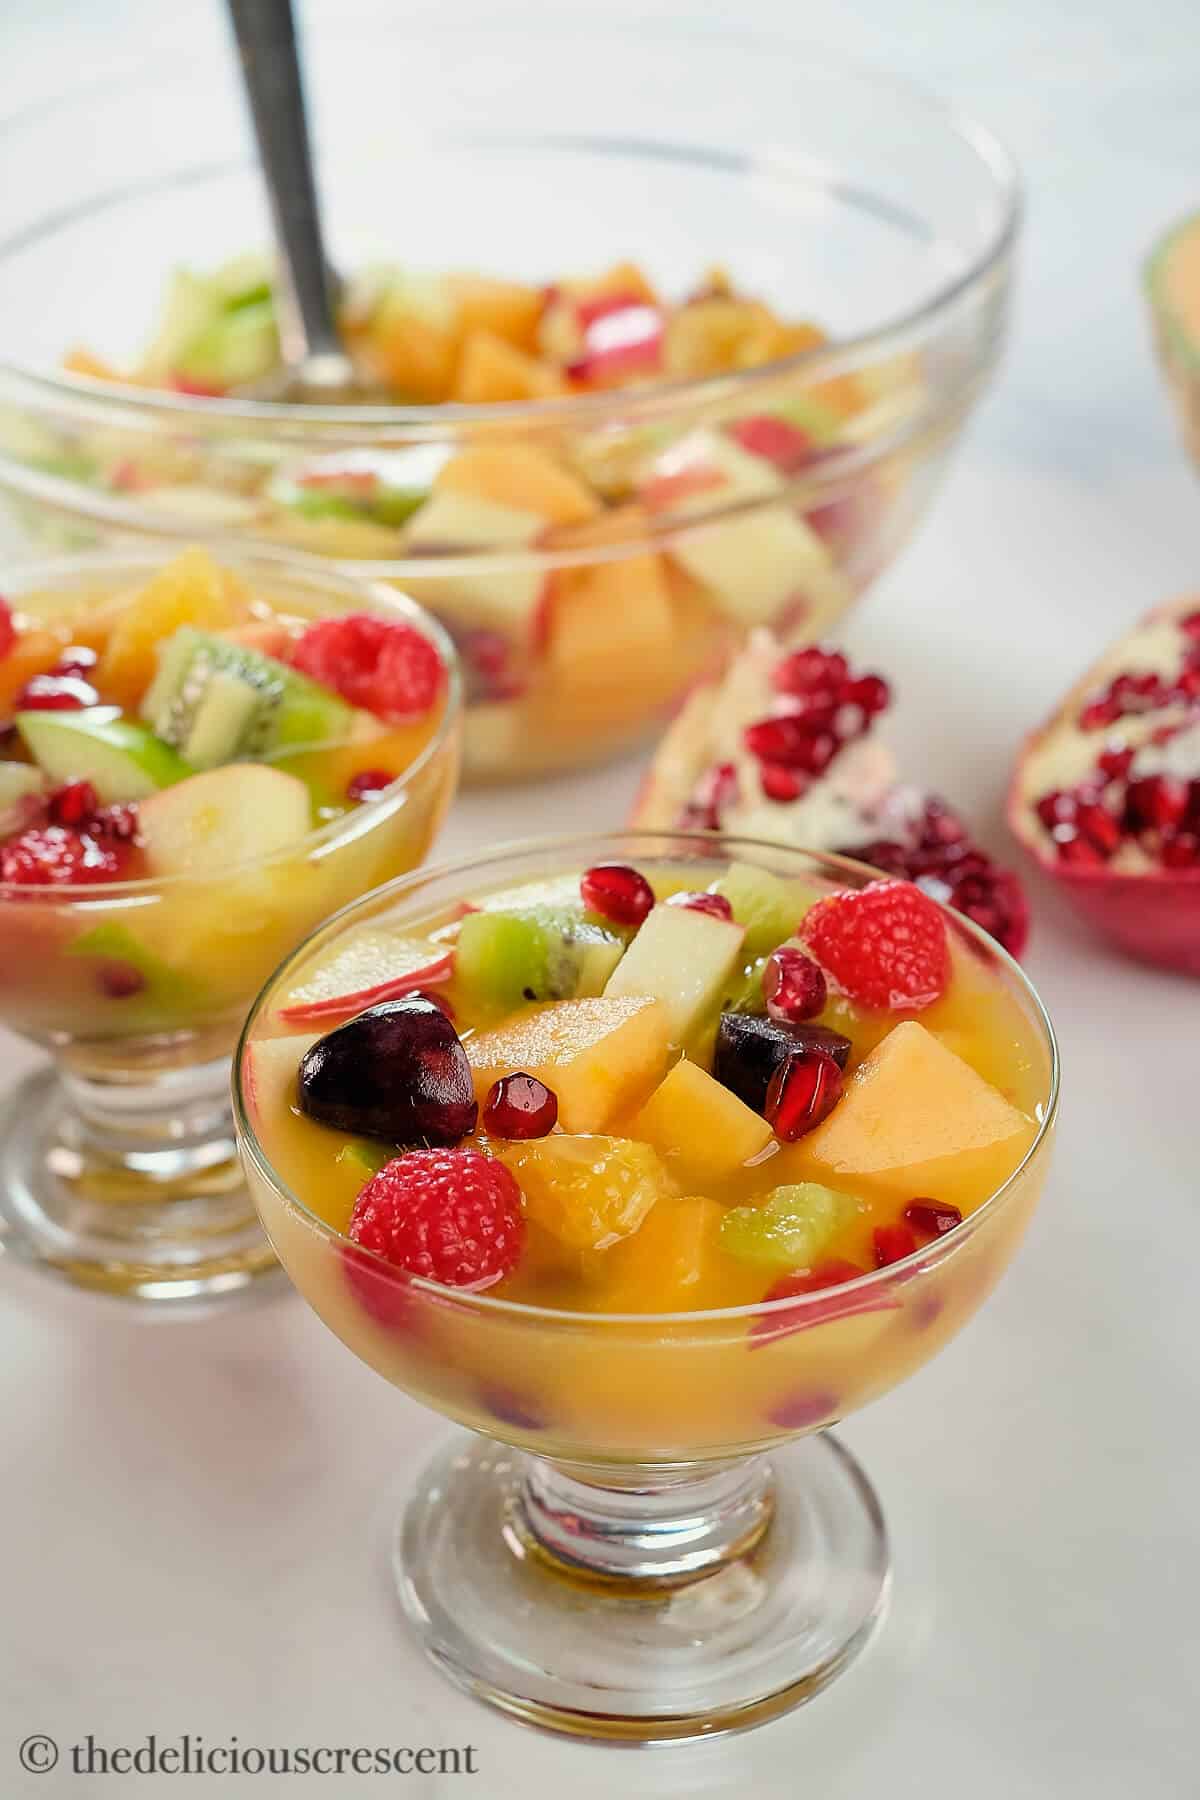 Assorted fruits with honey citrus dressing.